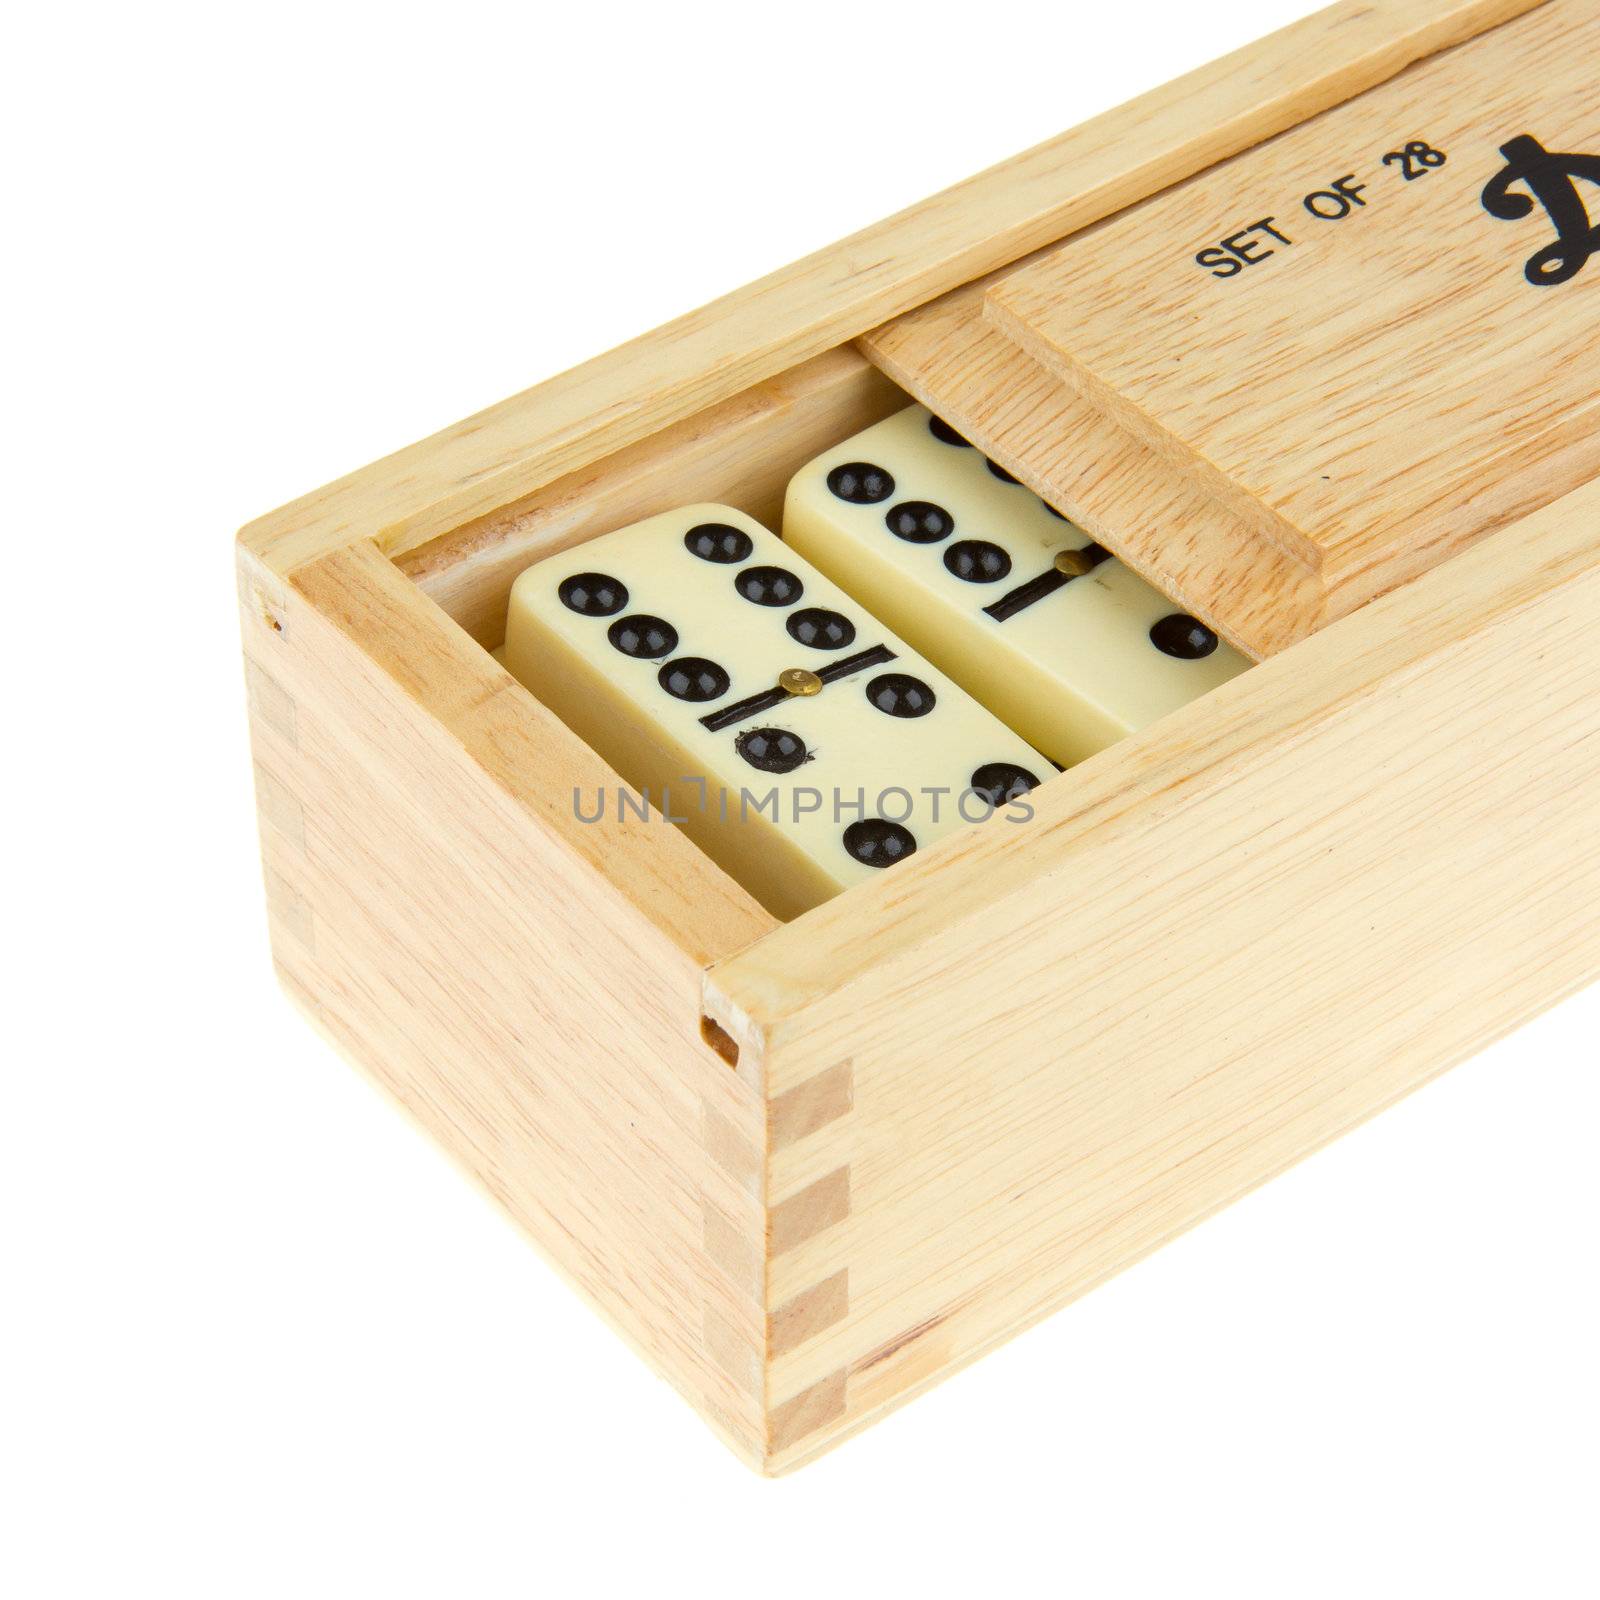 Domino in wooden box against the white background